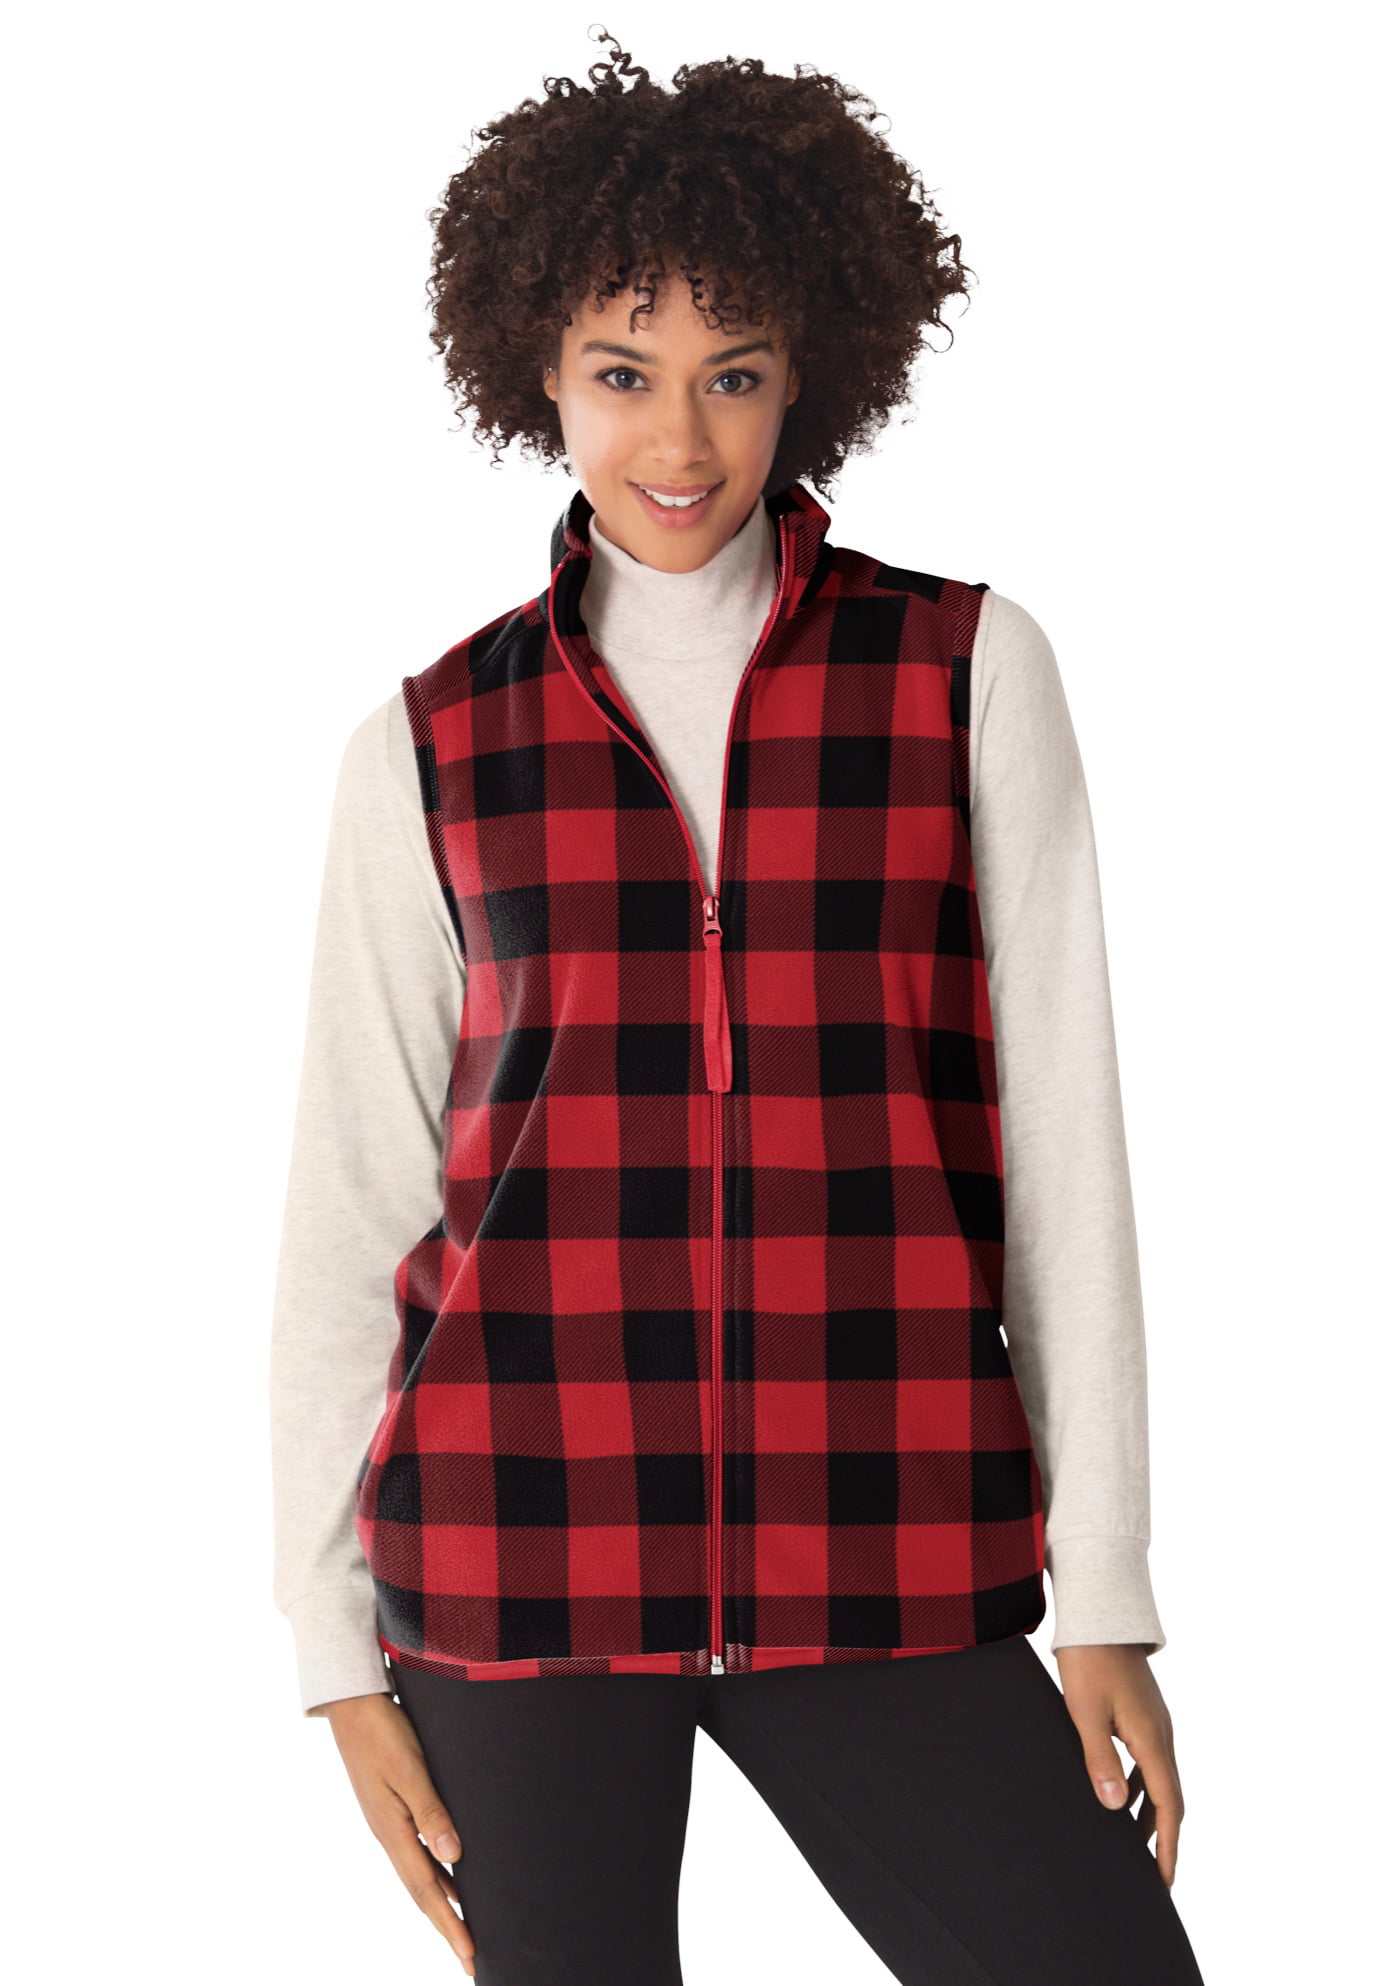 Black and red plaid vest london forex trading